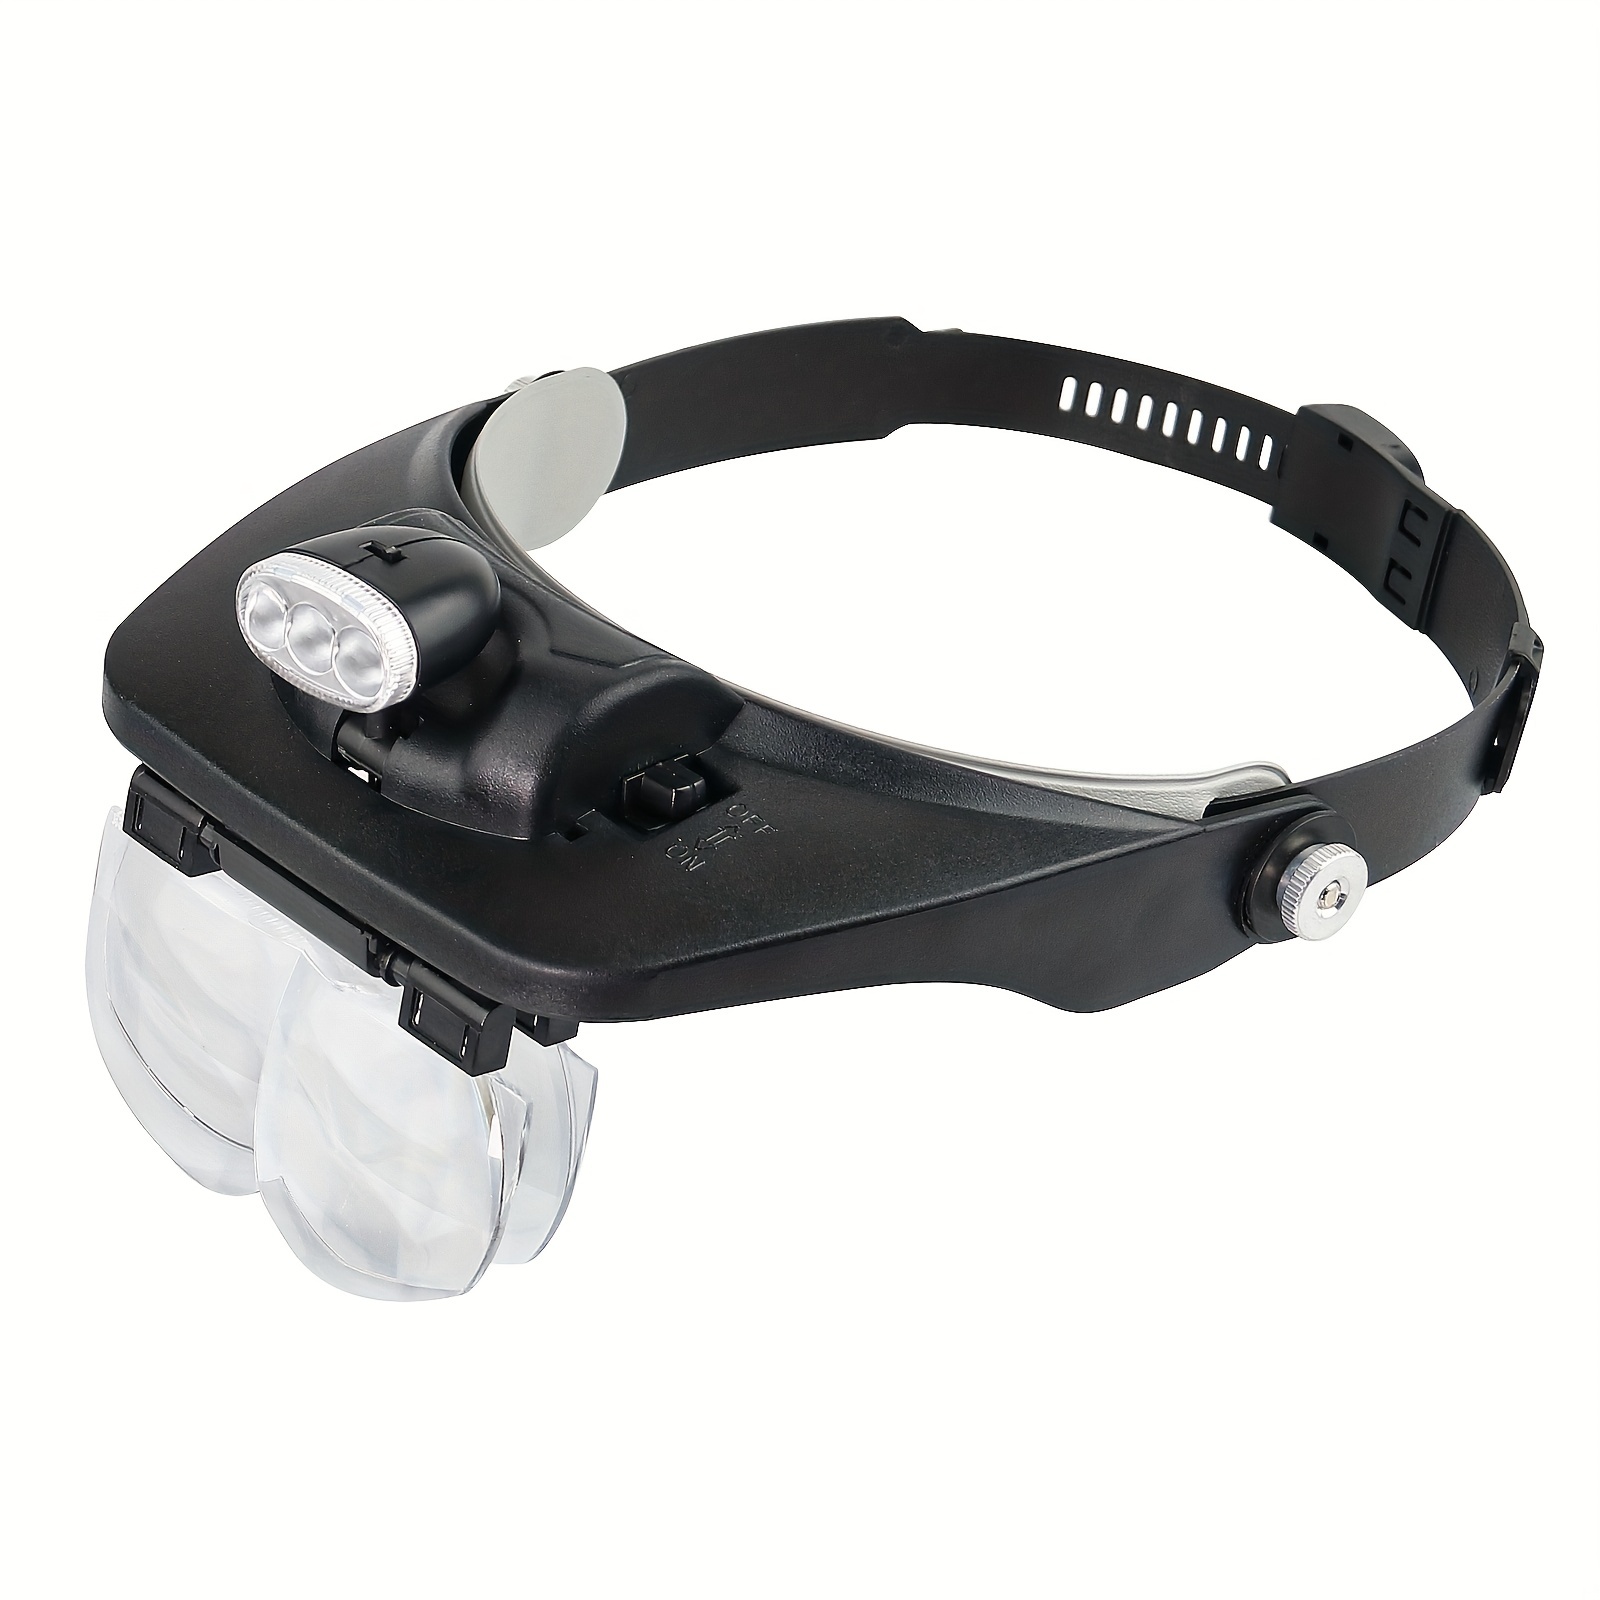 Magnifier With Light, Hands Free Headband Magnifier Stand Magnifier With 2  Led Lights For Hobby, De